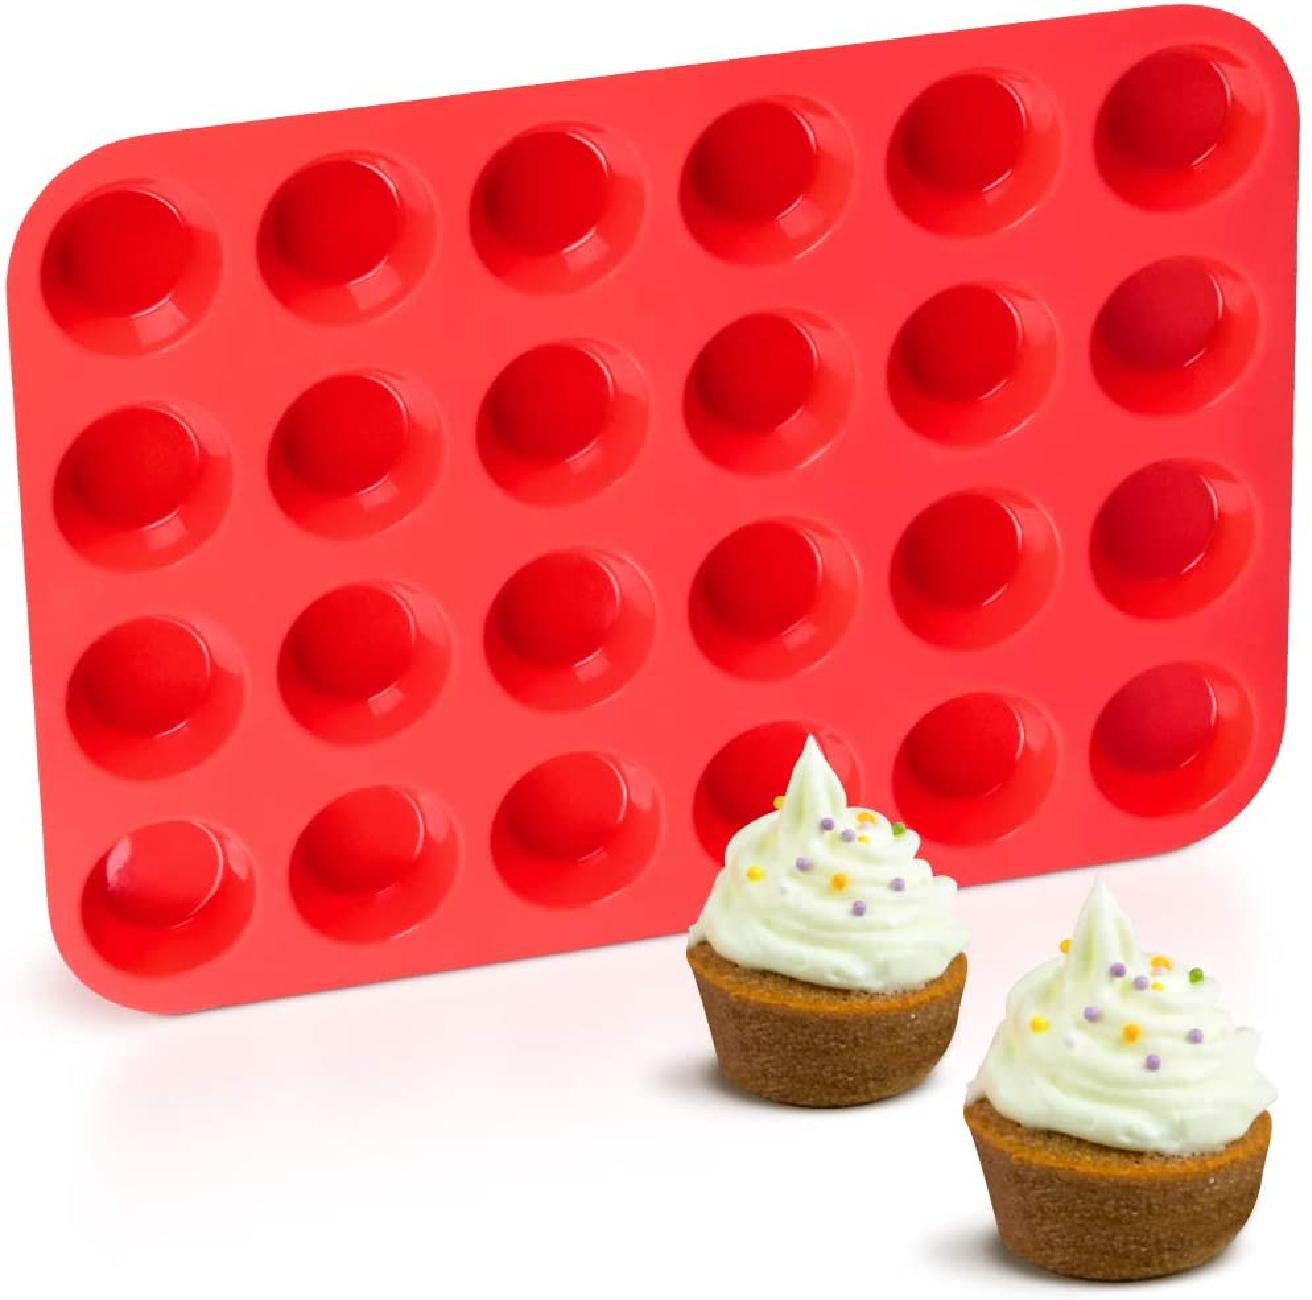 Silicone Mould Muffin Baking Set Cake Cup Bake Cases Jelly Bakeware Oven Cupcake